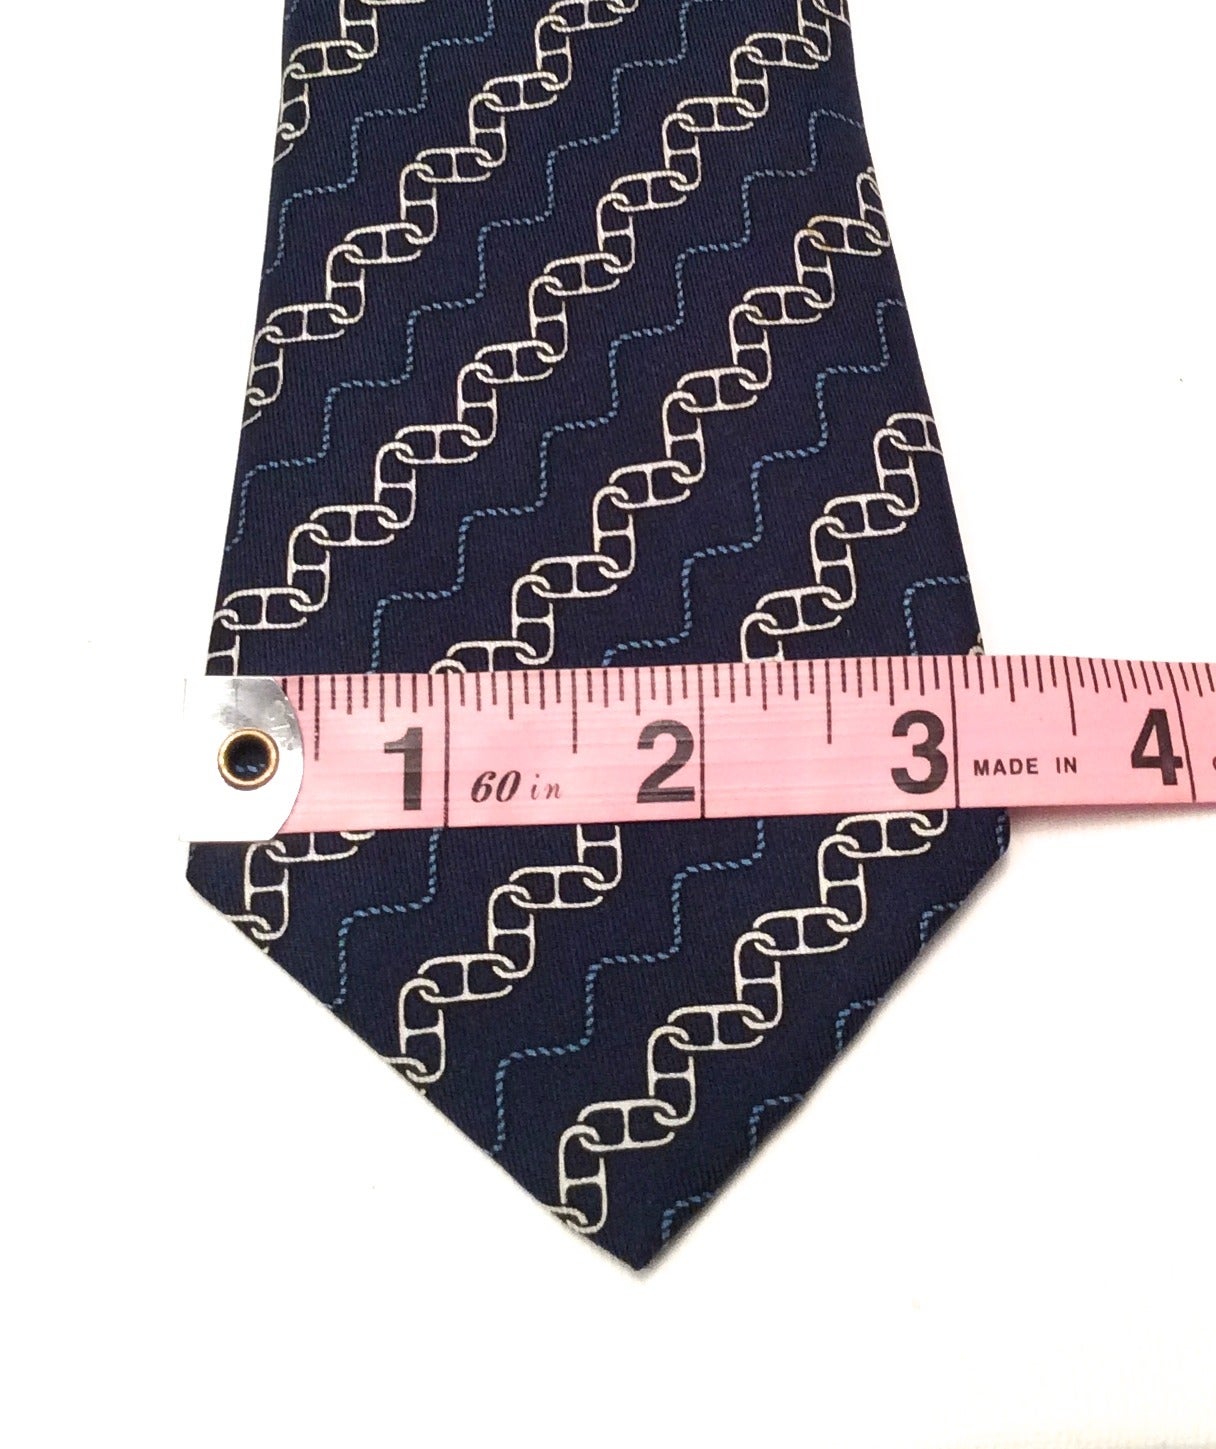 Hermes Silk Necktie that is made up of blue, black, and silver colors. There is a series of chain links patterned in a diagonal form along the length of the tie.